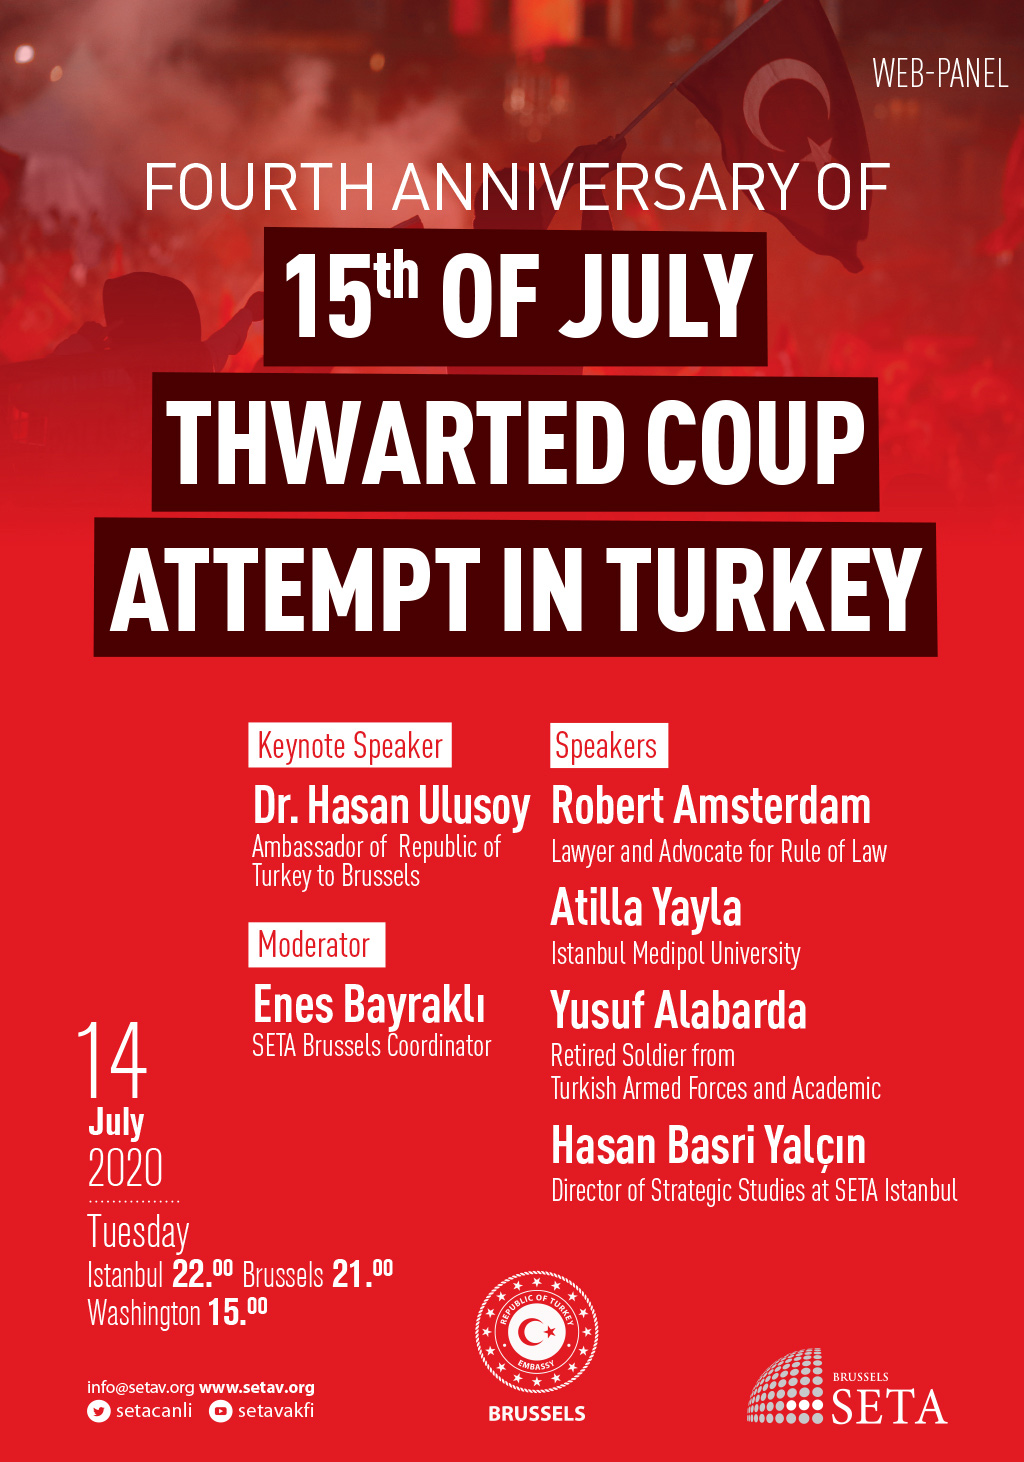 Fourth Anniversary of 15th of July Thwarted Coup Attempt in Turkey